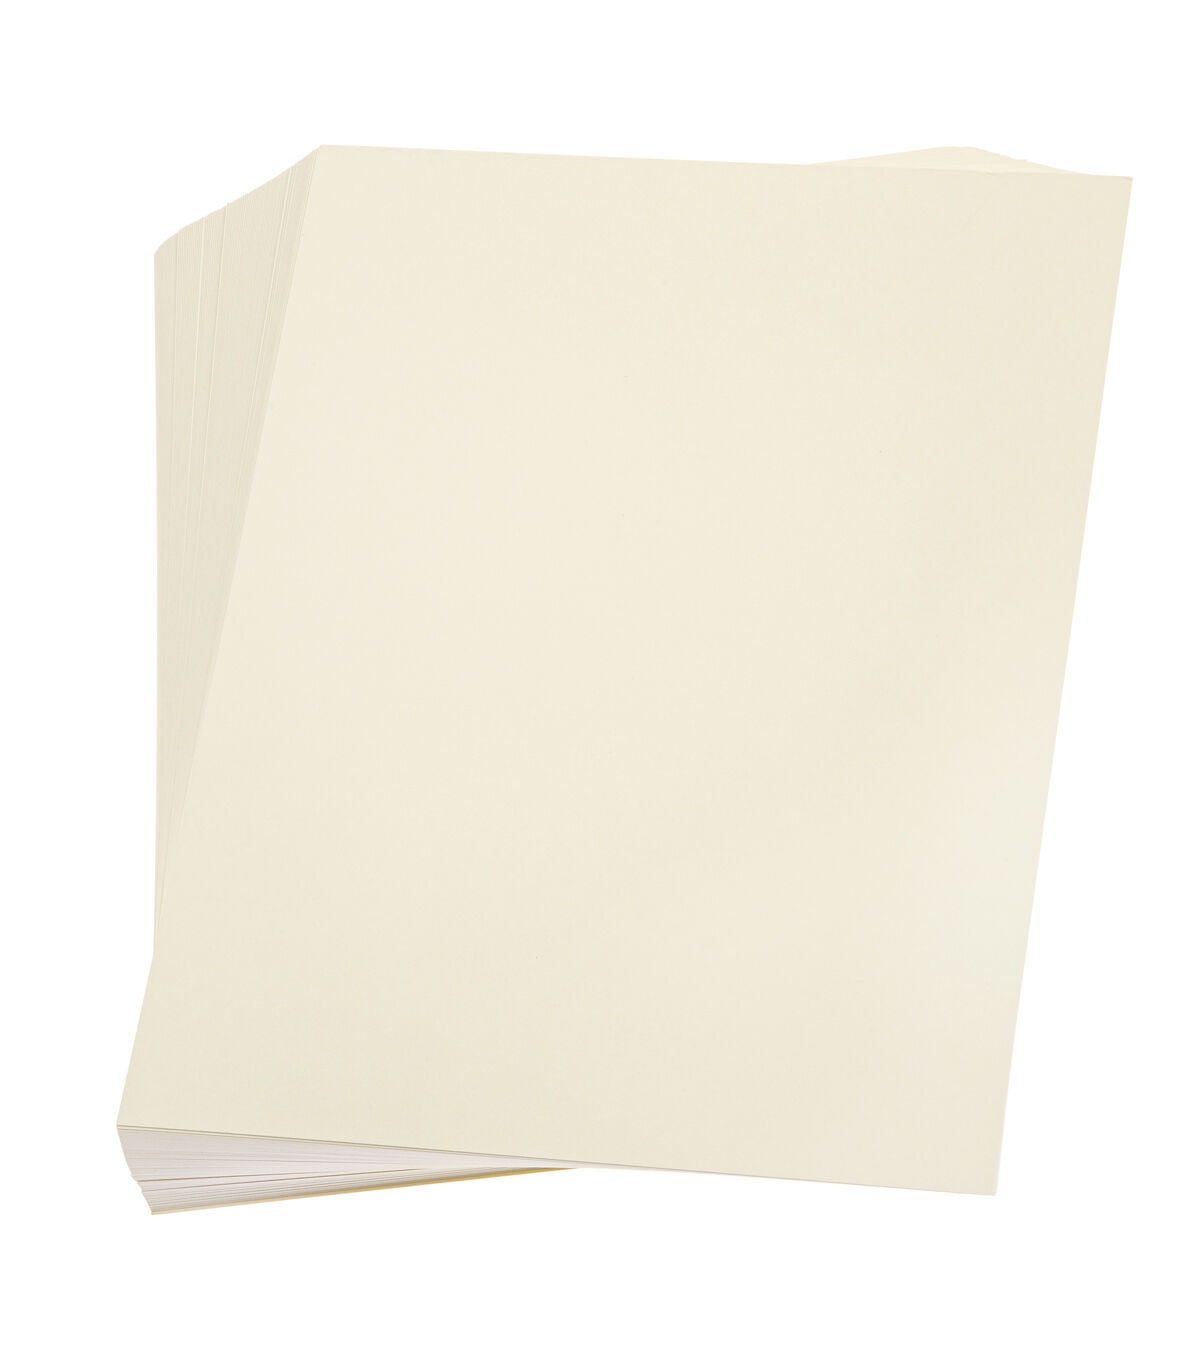 Cardstock 8.5 x 11 Paper Pack - 110 lb Yellow Ivory Cardstock Scrapbook Paper - Double Sided Card Stock for Crafts, Embossing, Cardmaking - 100